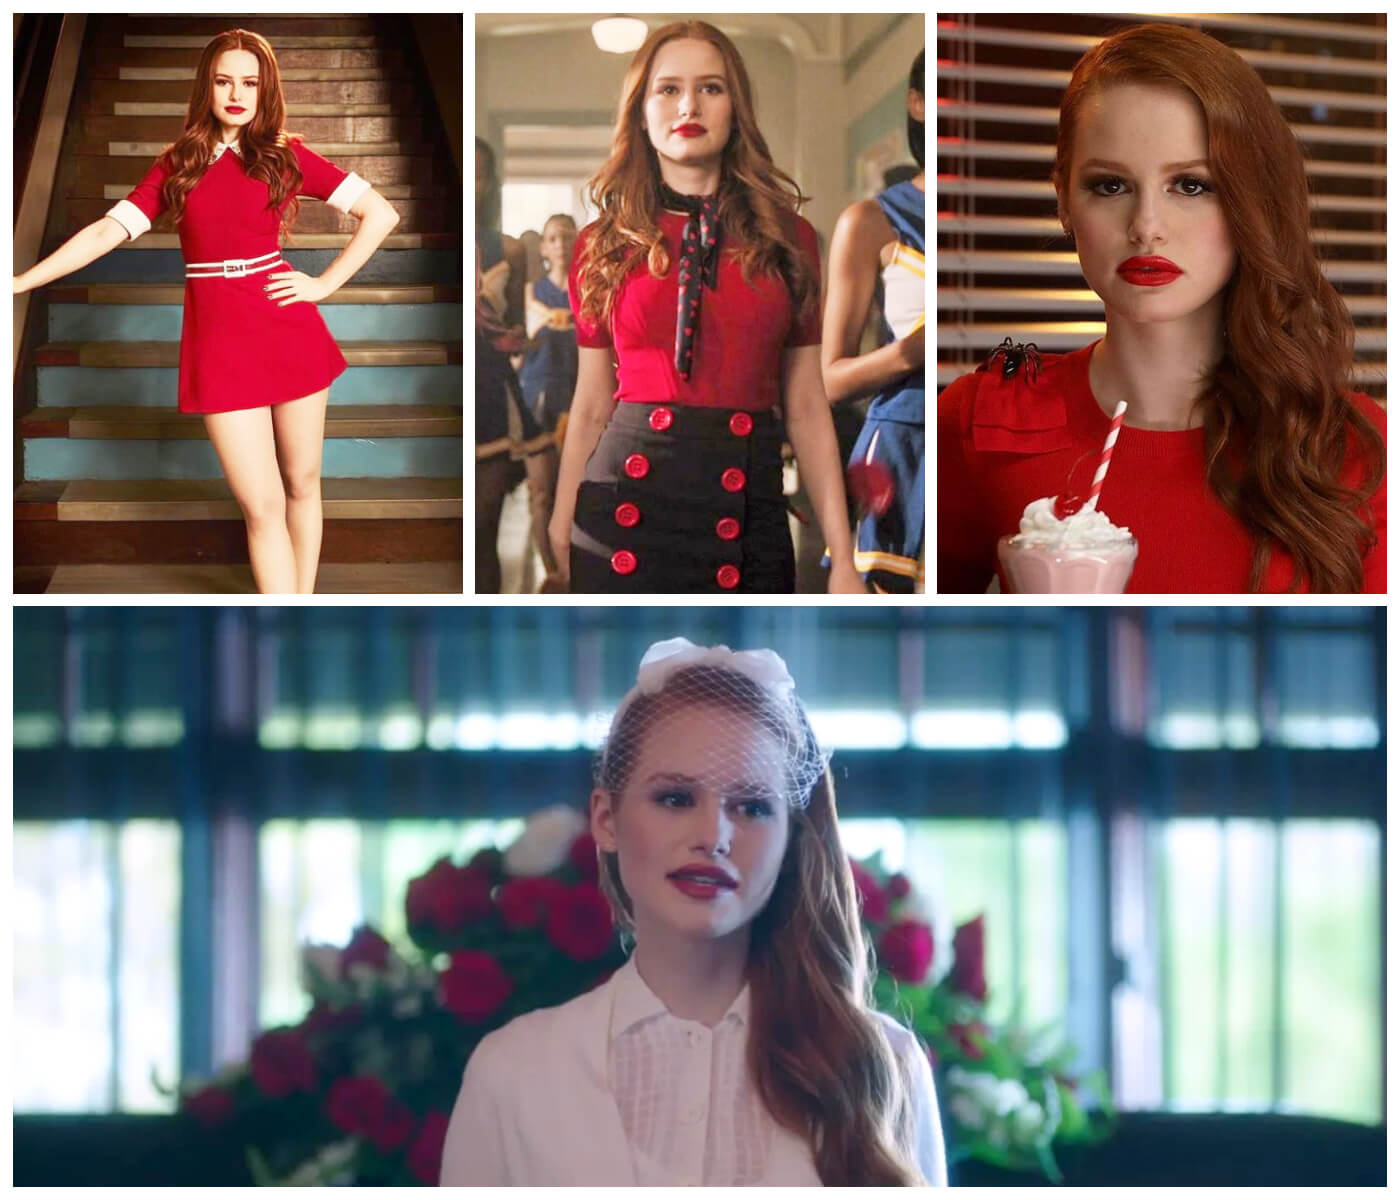 hidden hints in movie costumes Riverdale